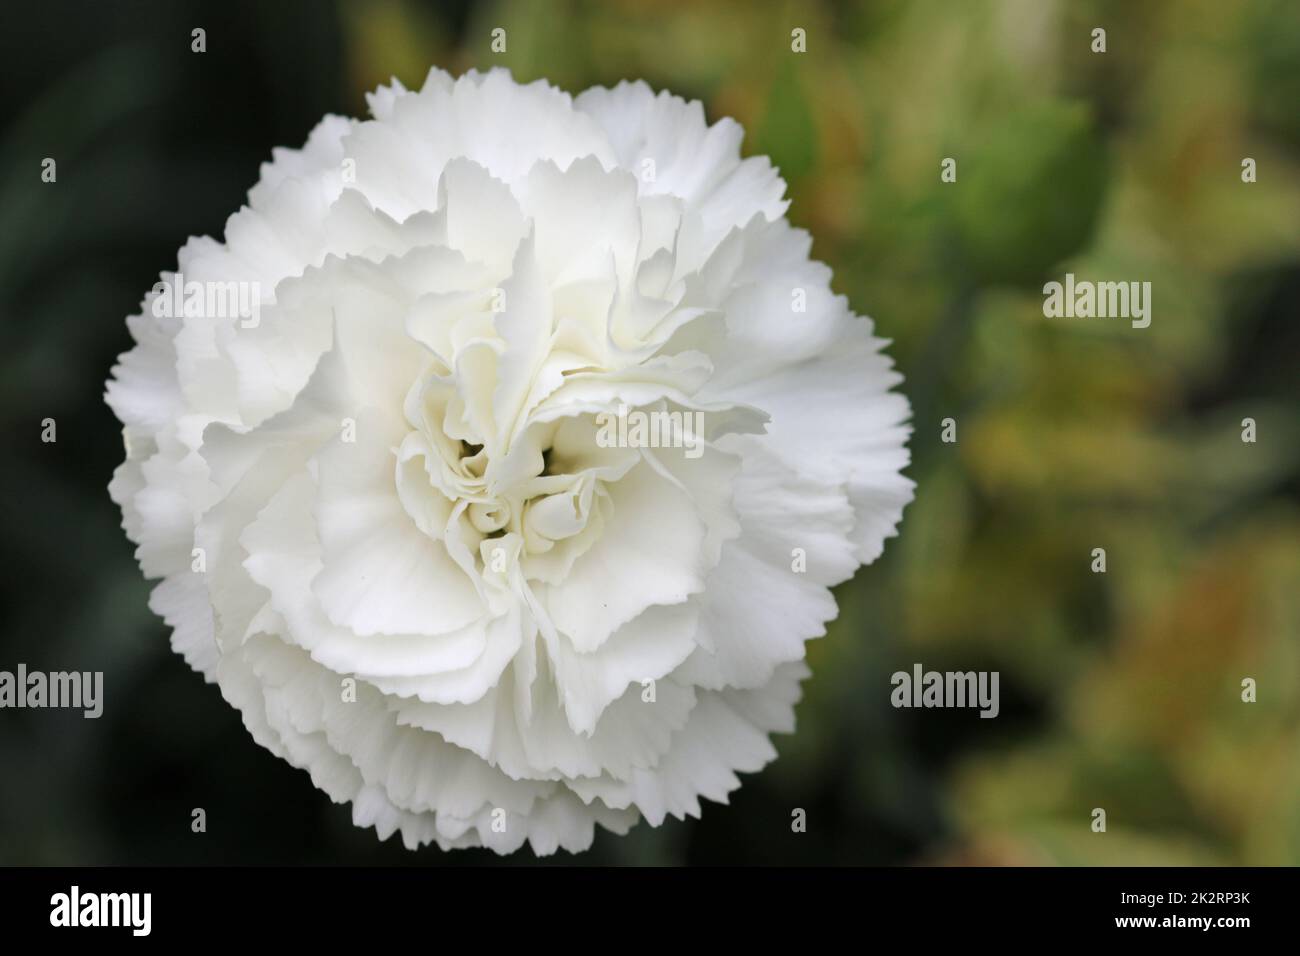 White Dianthus flower in close up Stock Photo